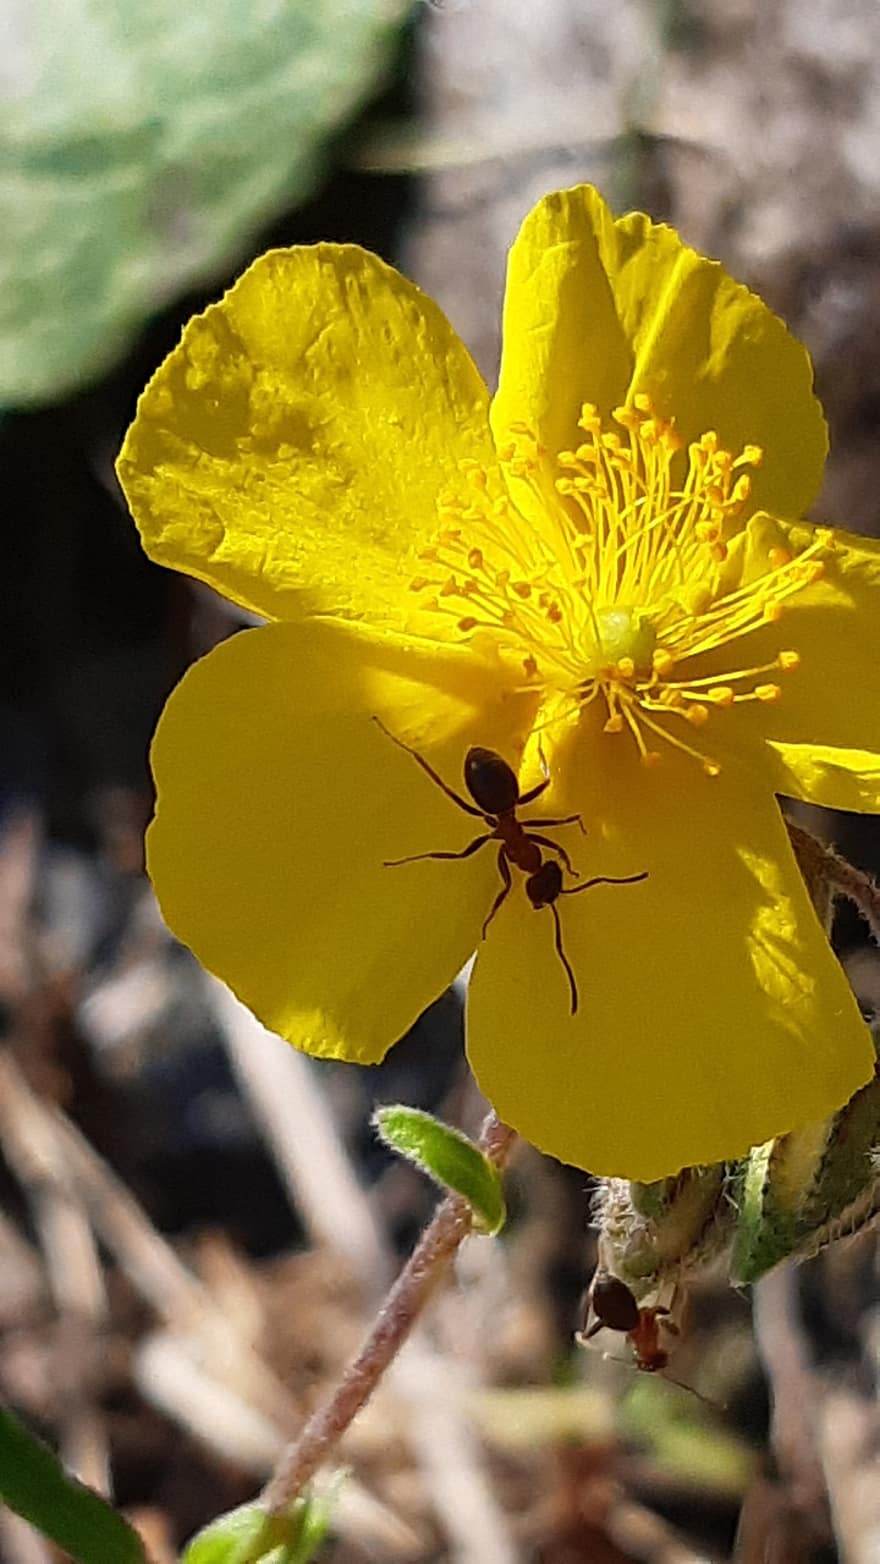 Yellow Flower, Ant, Pistils, Petals, Nectar, Yellow Petals, Bloom, Blossom, Flora, Nature, Insect